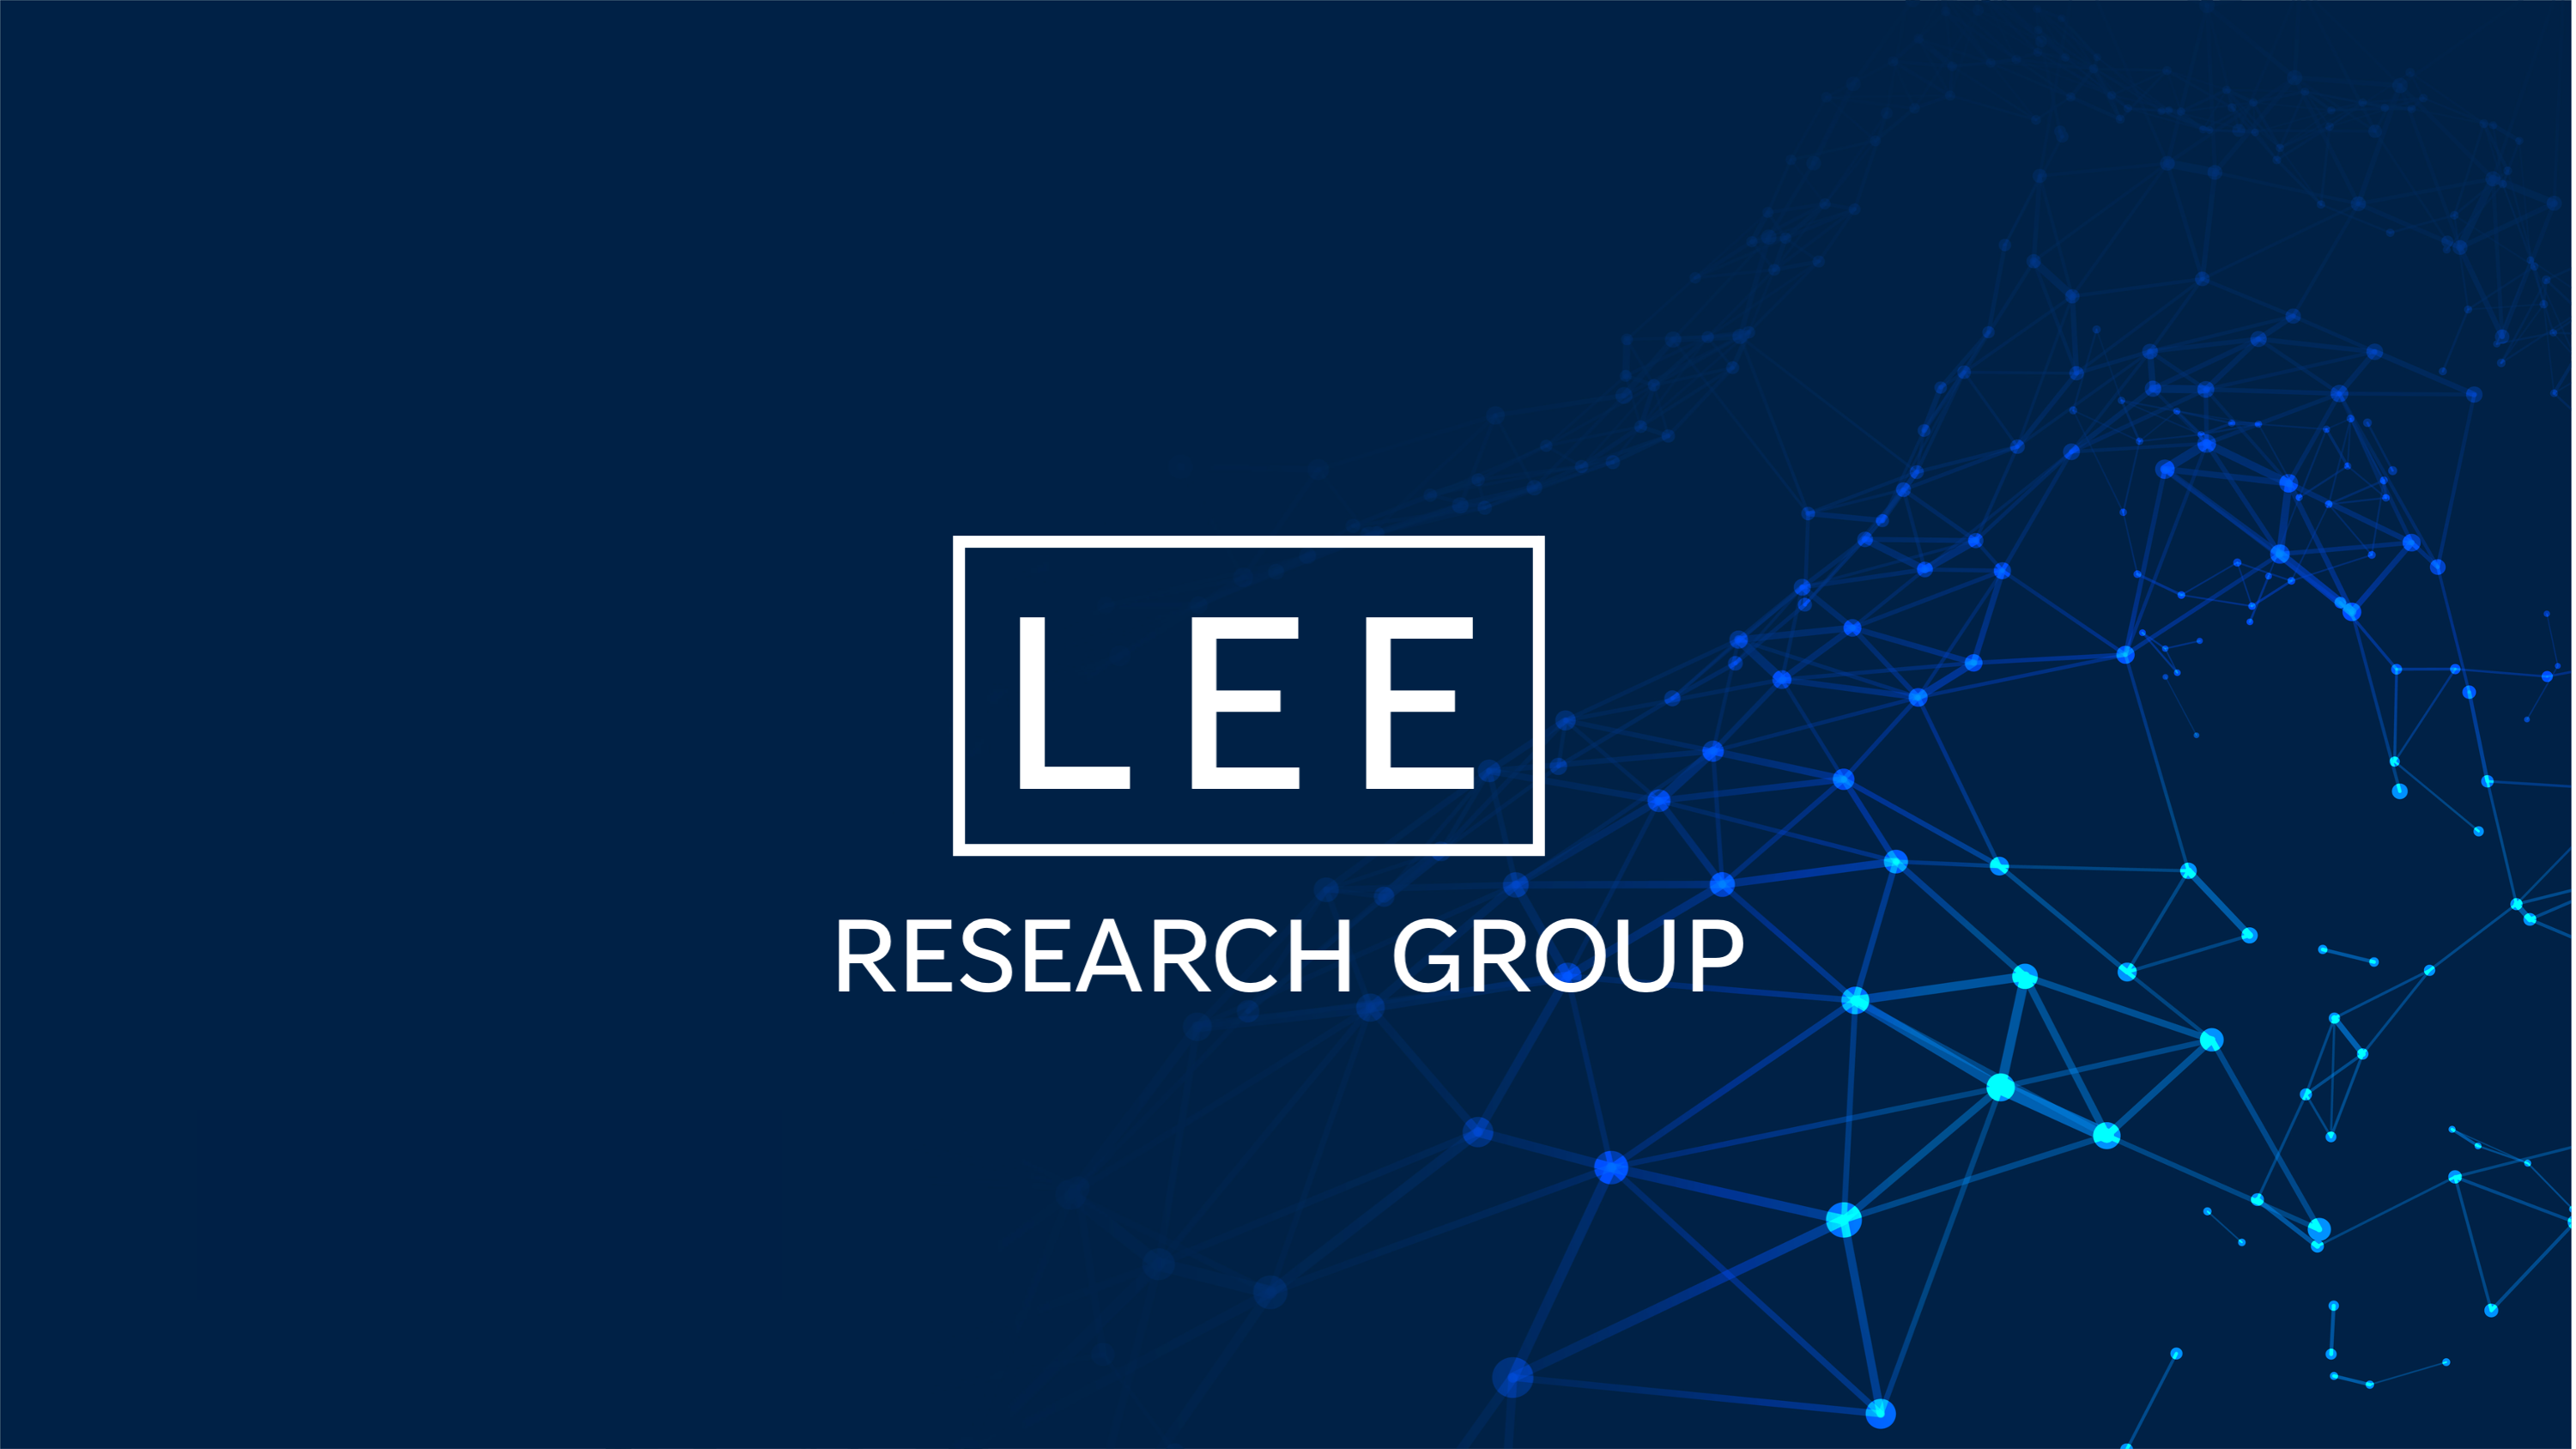 Lee Research Group